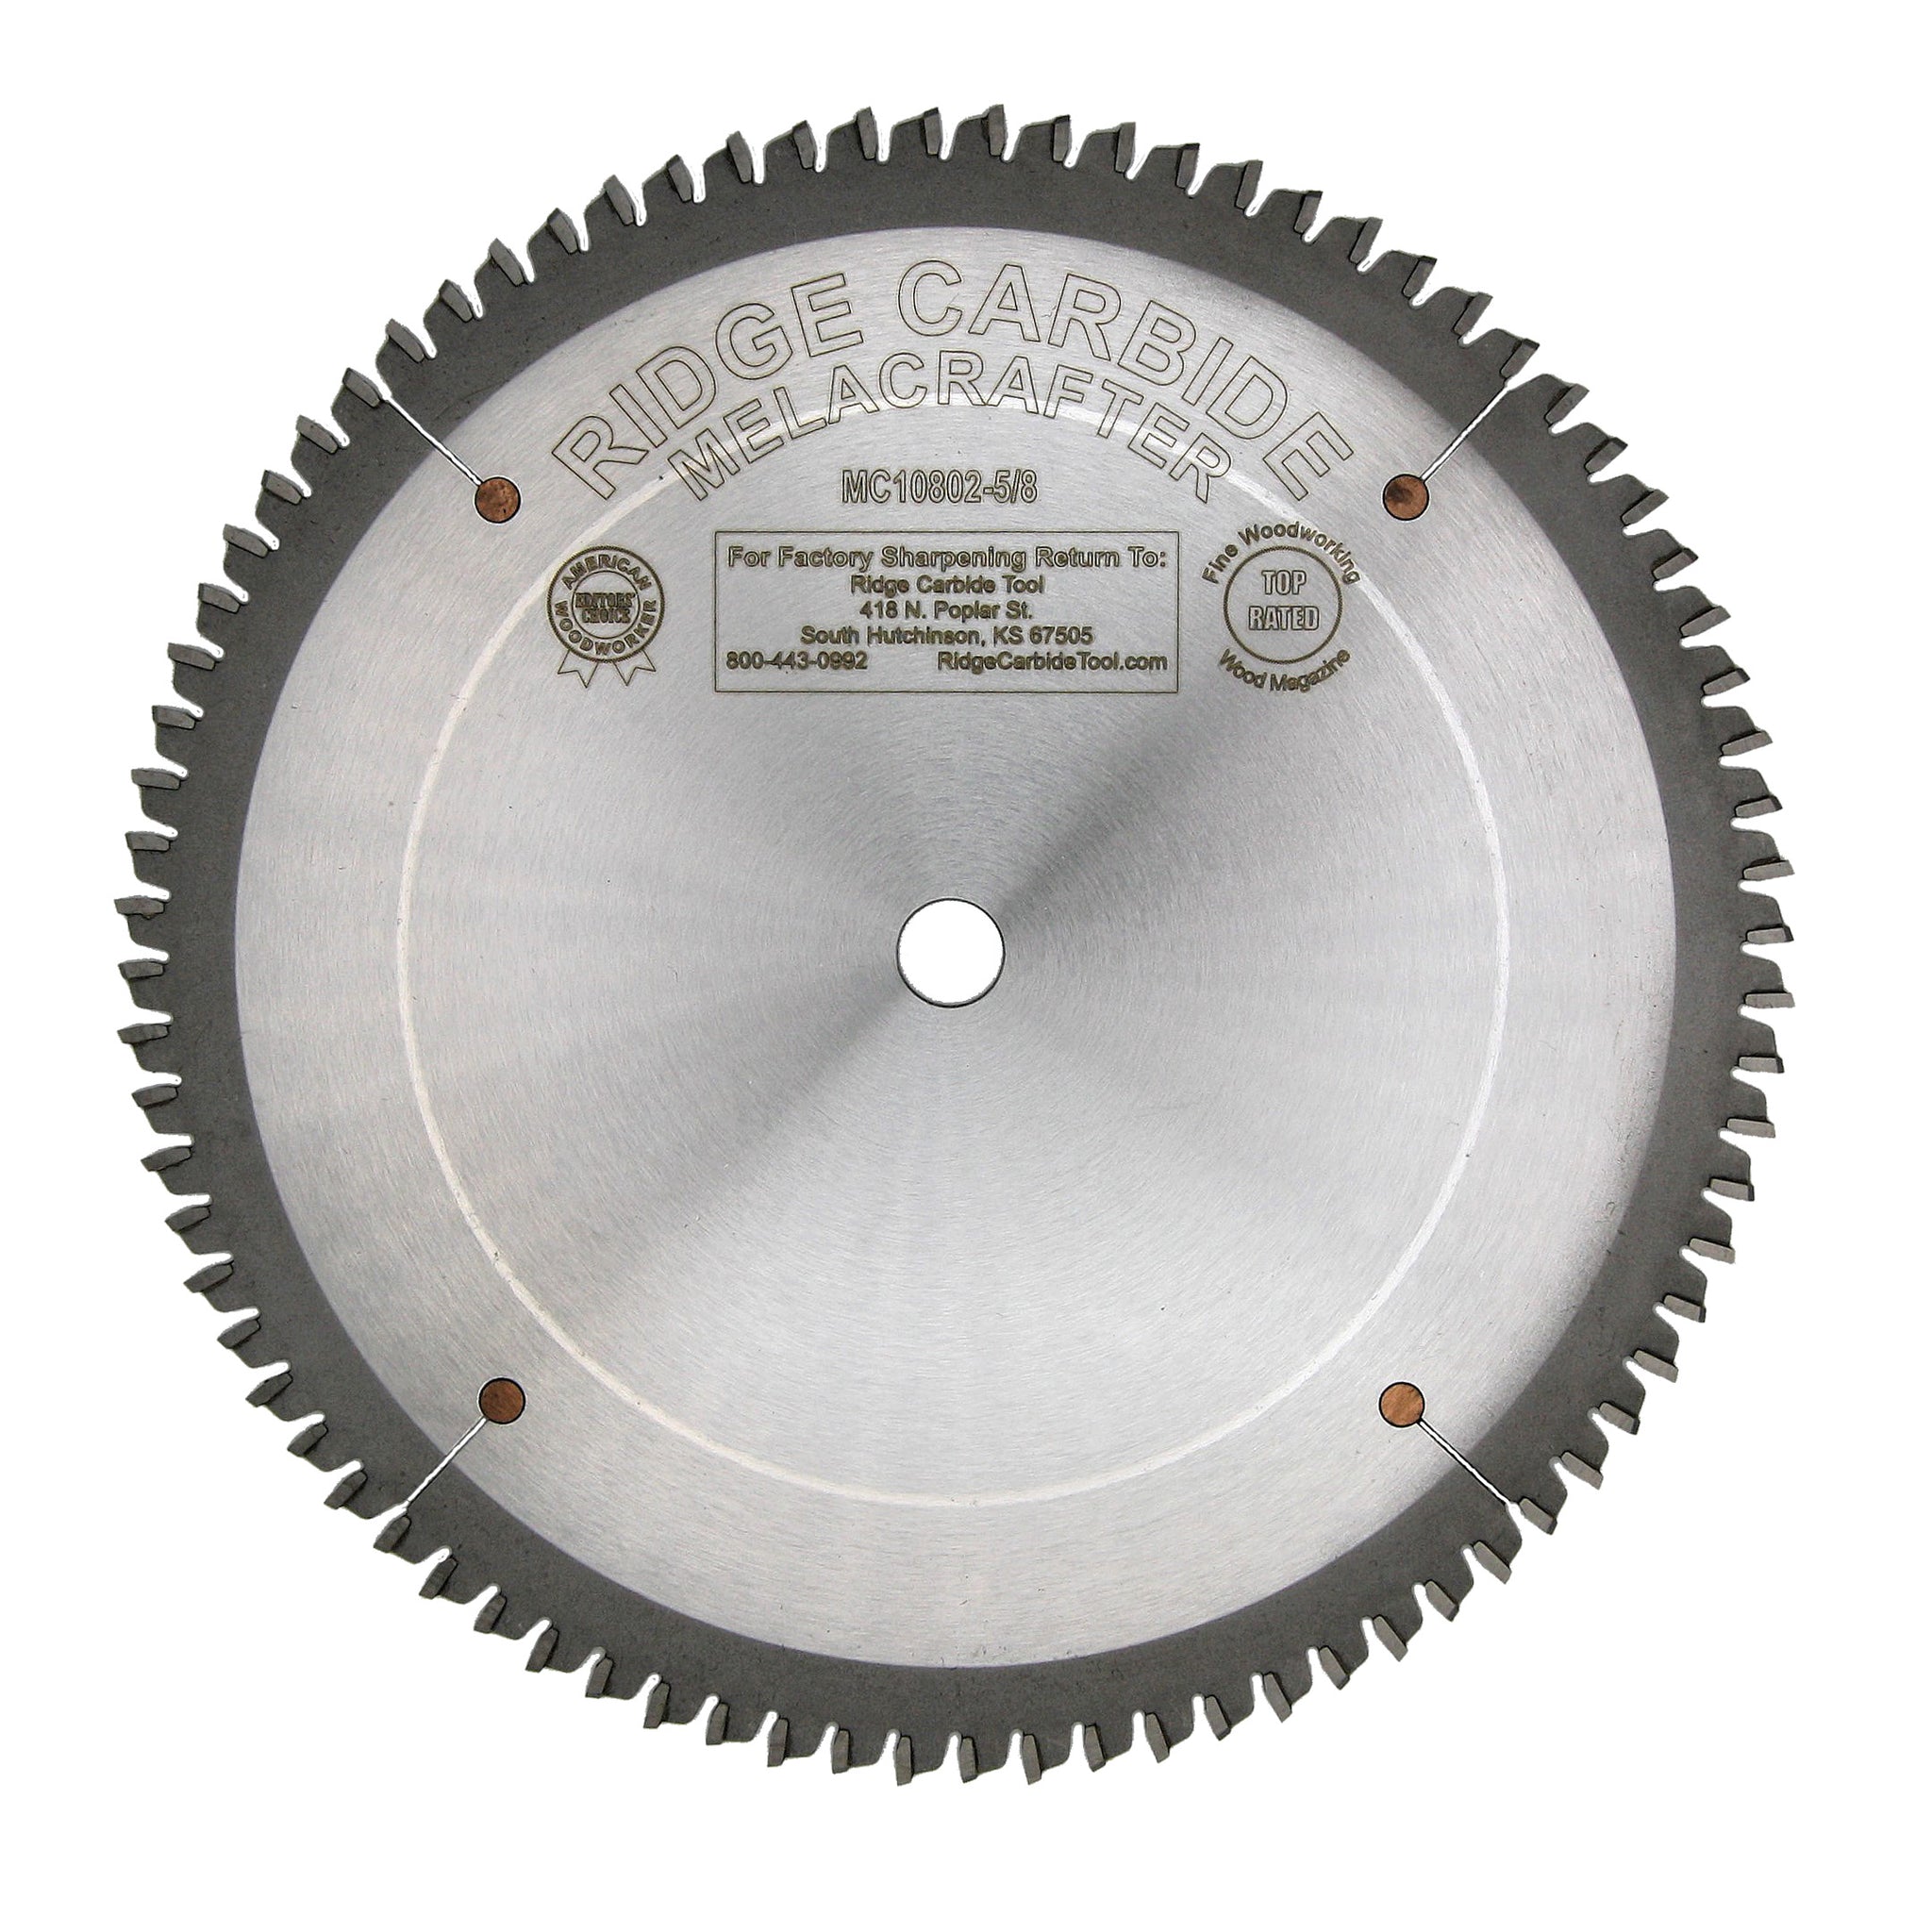 Benchmark Abrasives 5-3/8 18 Tooth TCT Saw Blade for Fast Cutting & Trimming